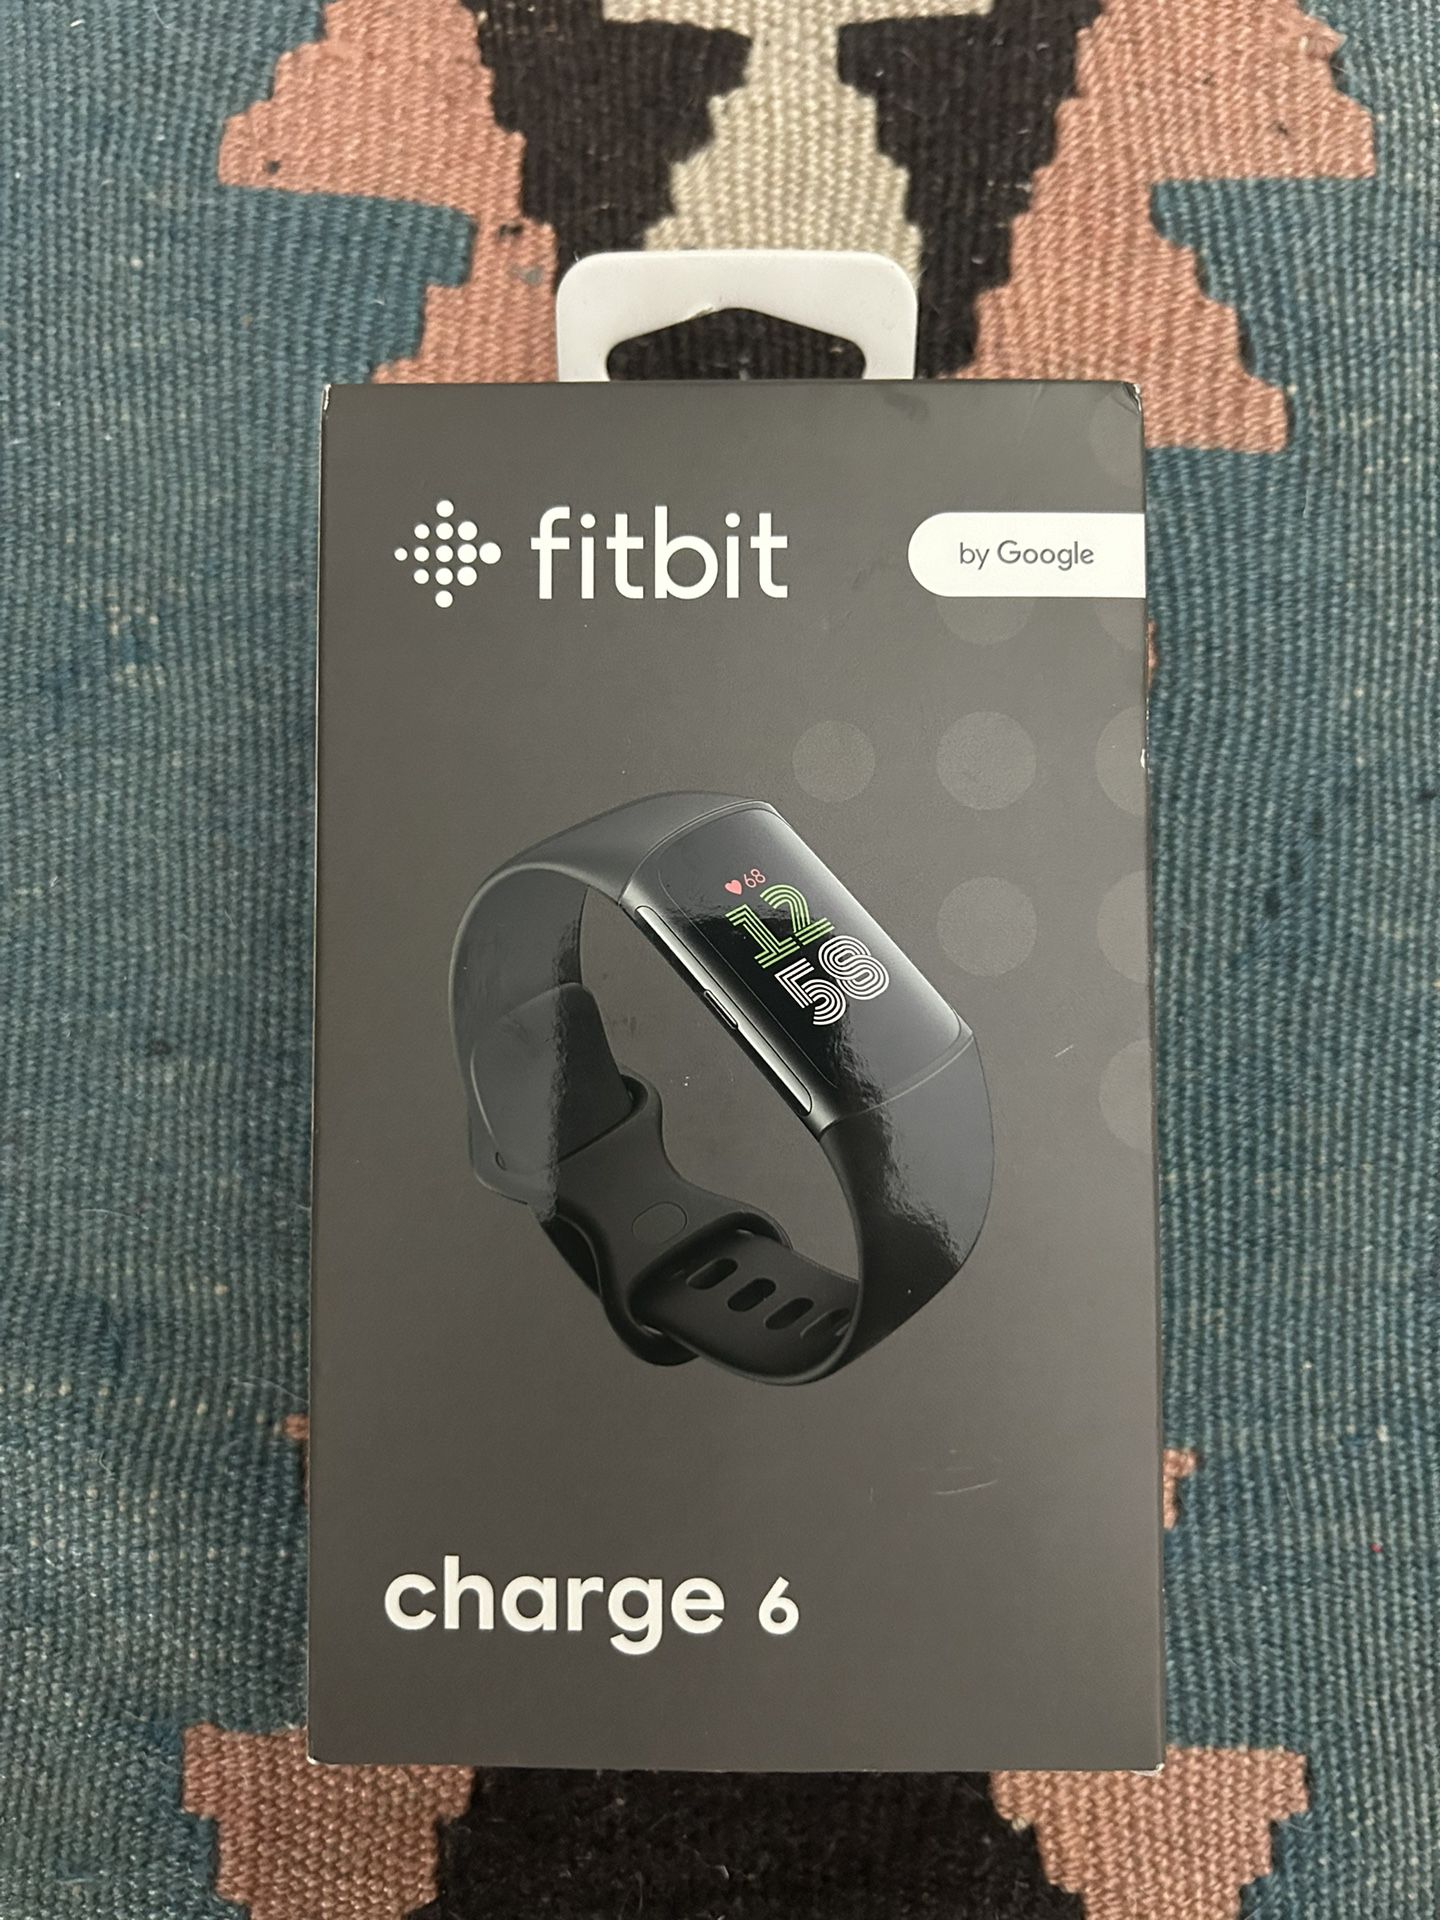 Fitbit Charge 6 - Unopened Box